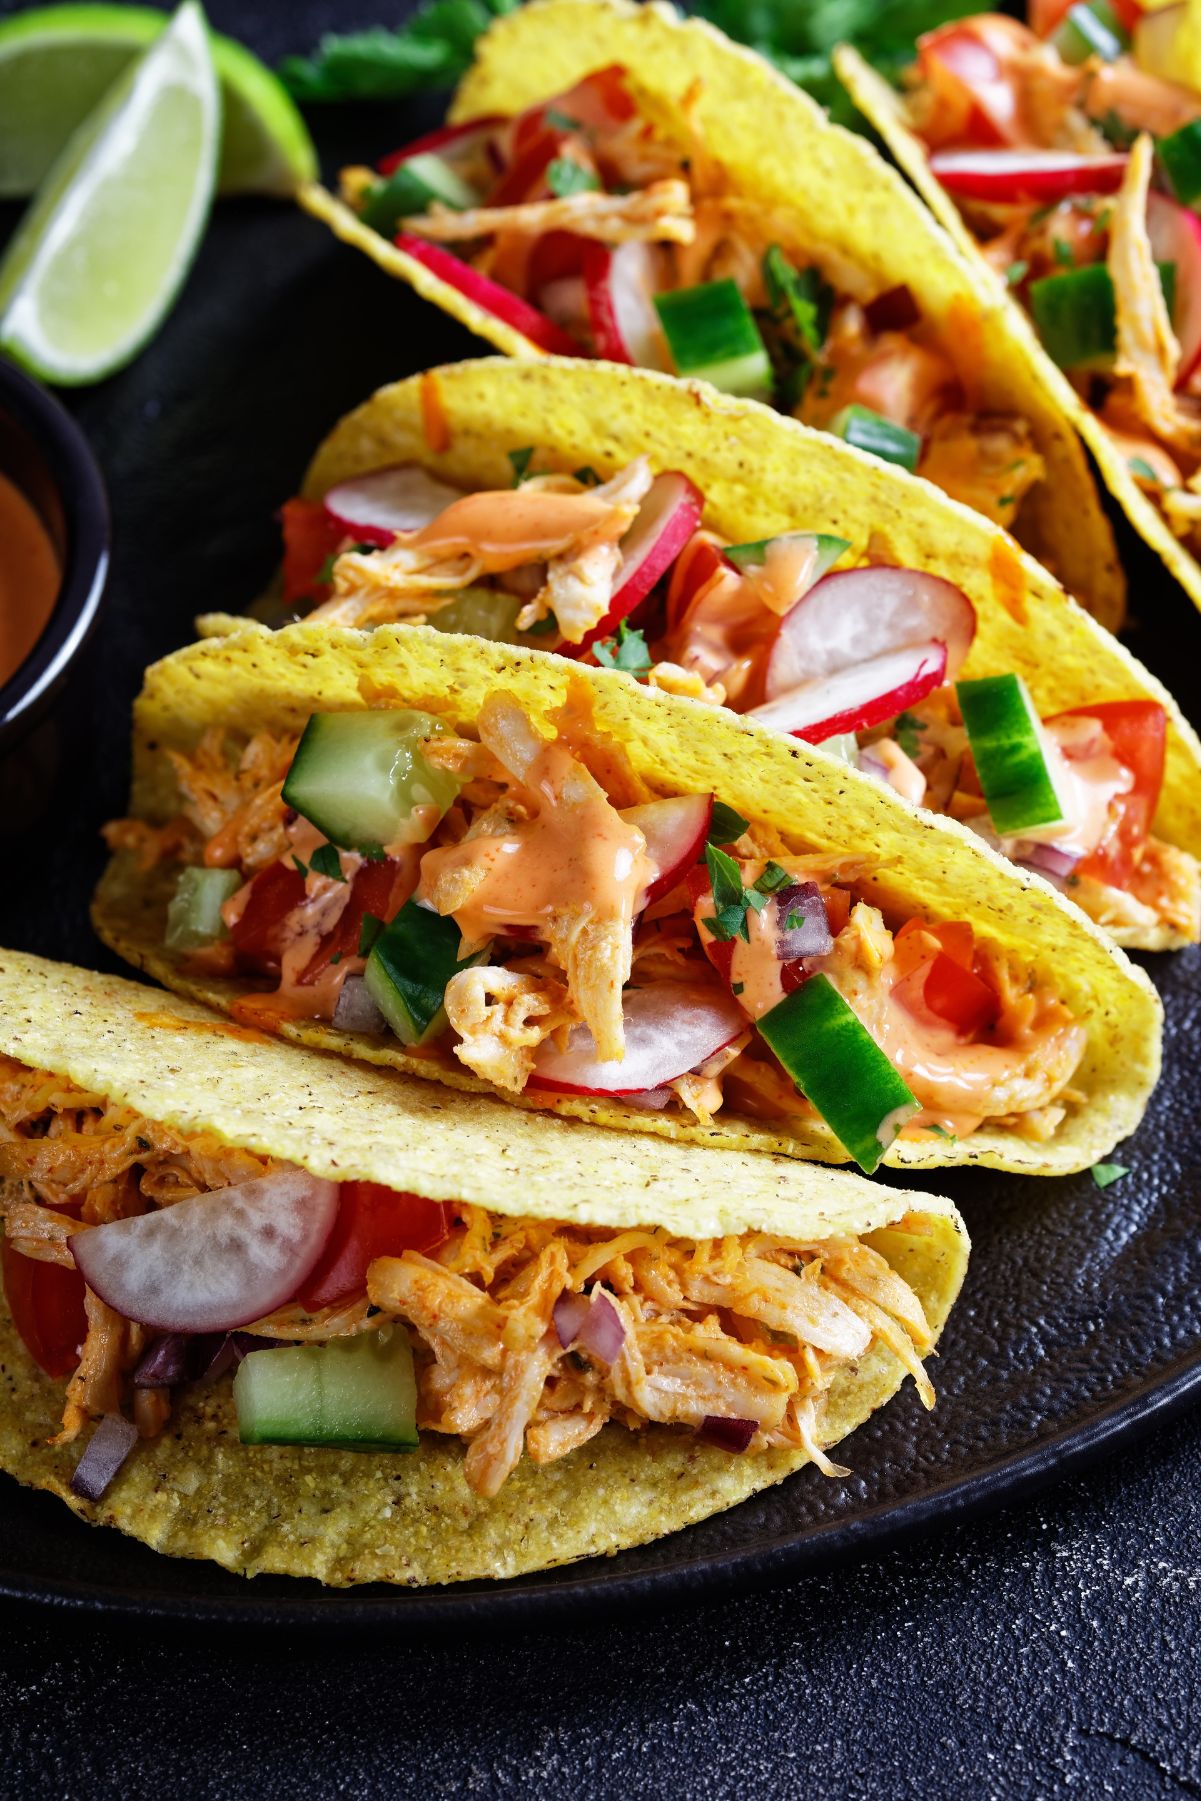 Photo of crunchy yellow corn tacos filled with shredded Slow Cooker Mexican Chicken Taco Meat, topped with fresh radishes, cucumber slices, and a creamy sauce. They are served on a black plate accompanied by lime wedges, showcasing a colorful and appetizing meal option.